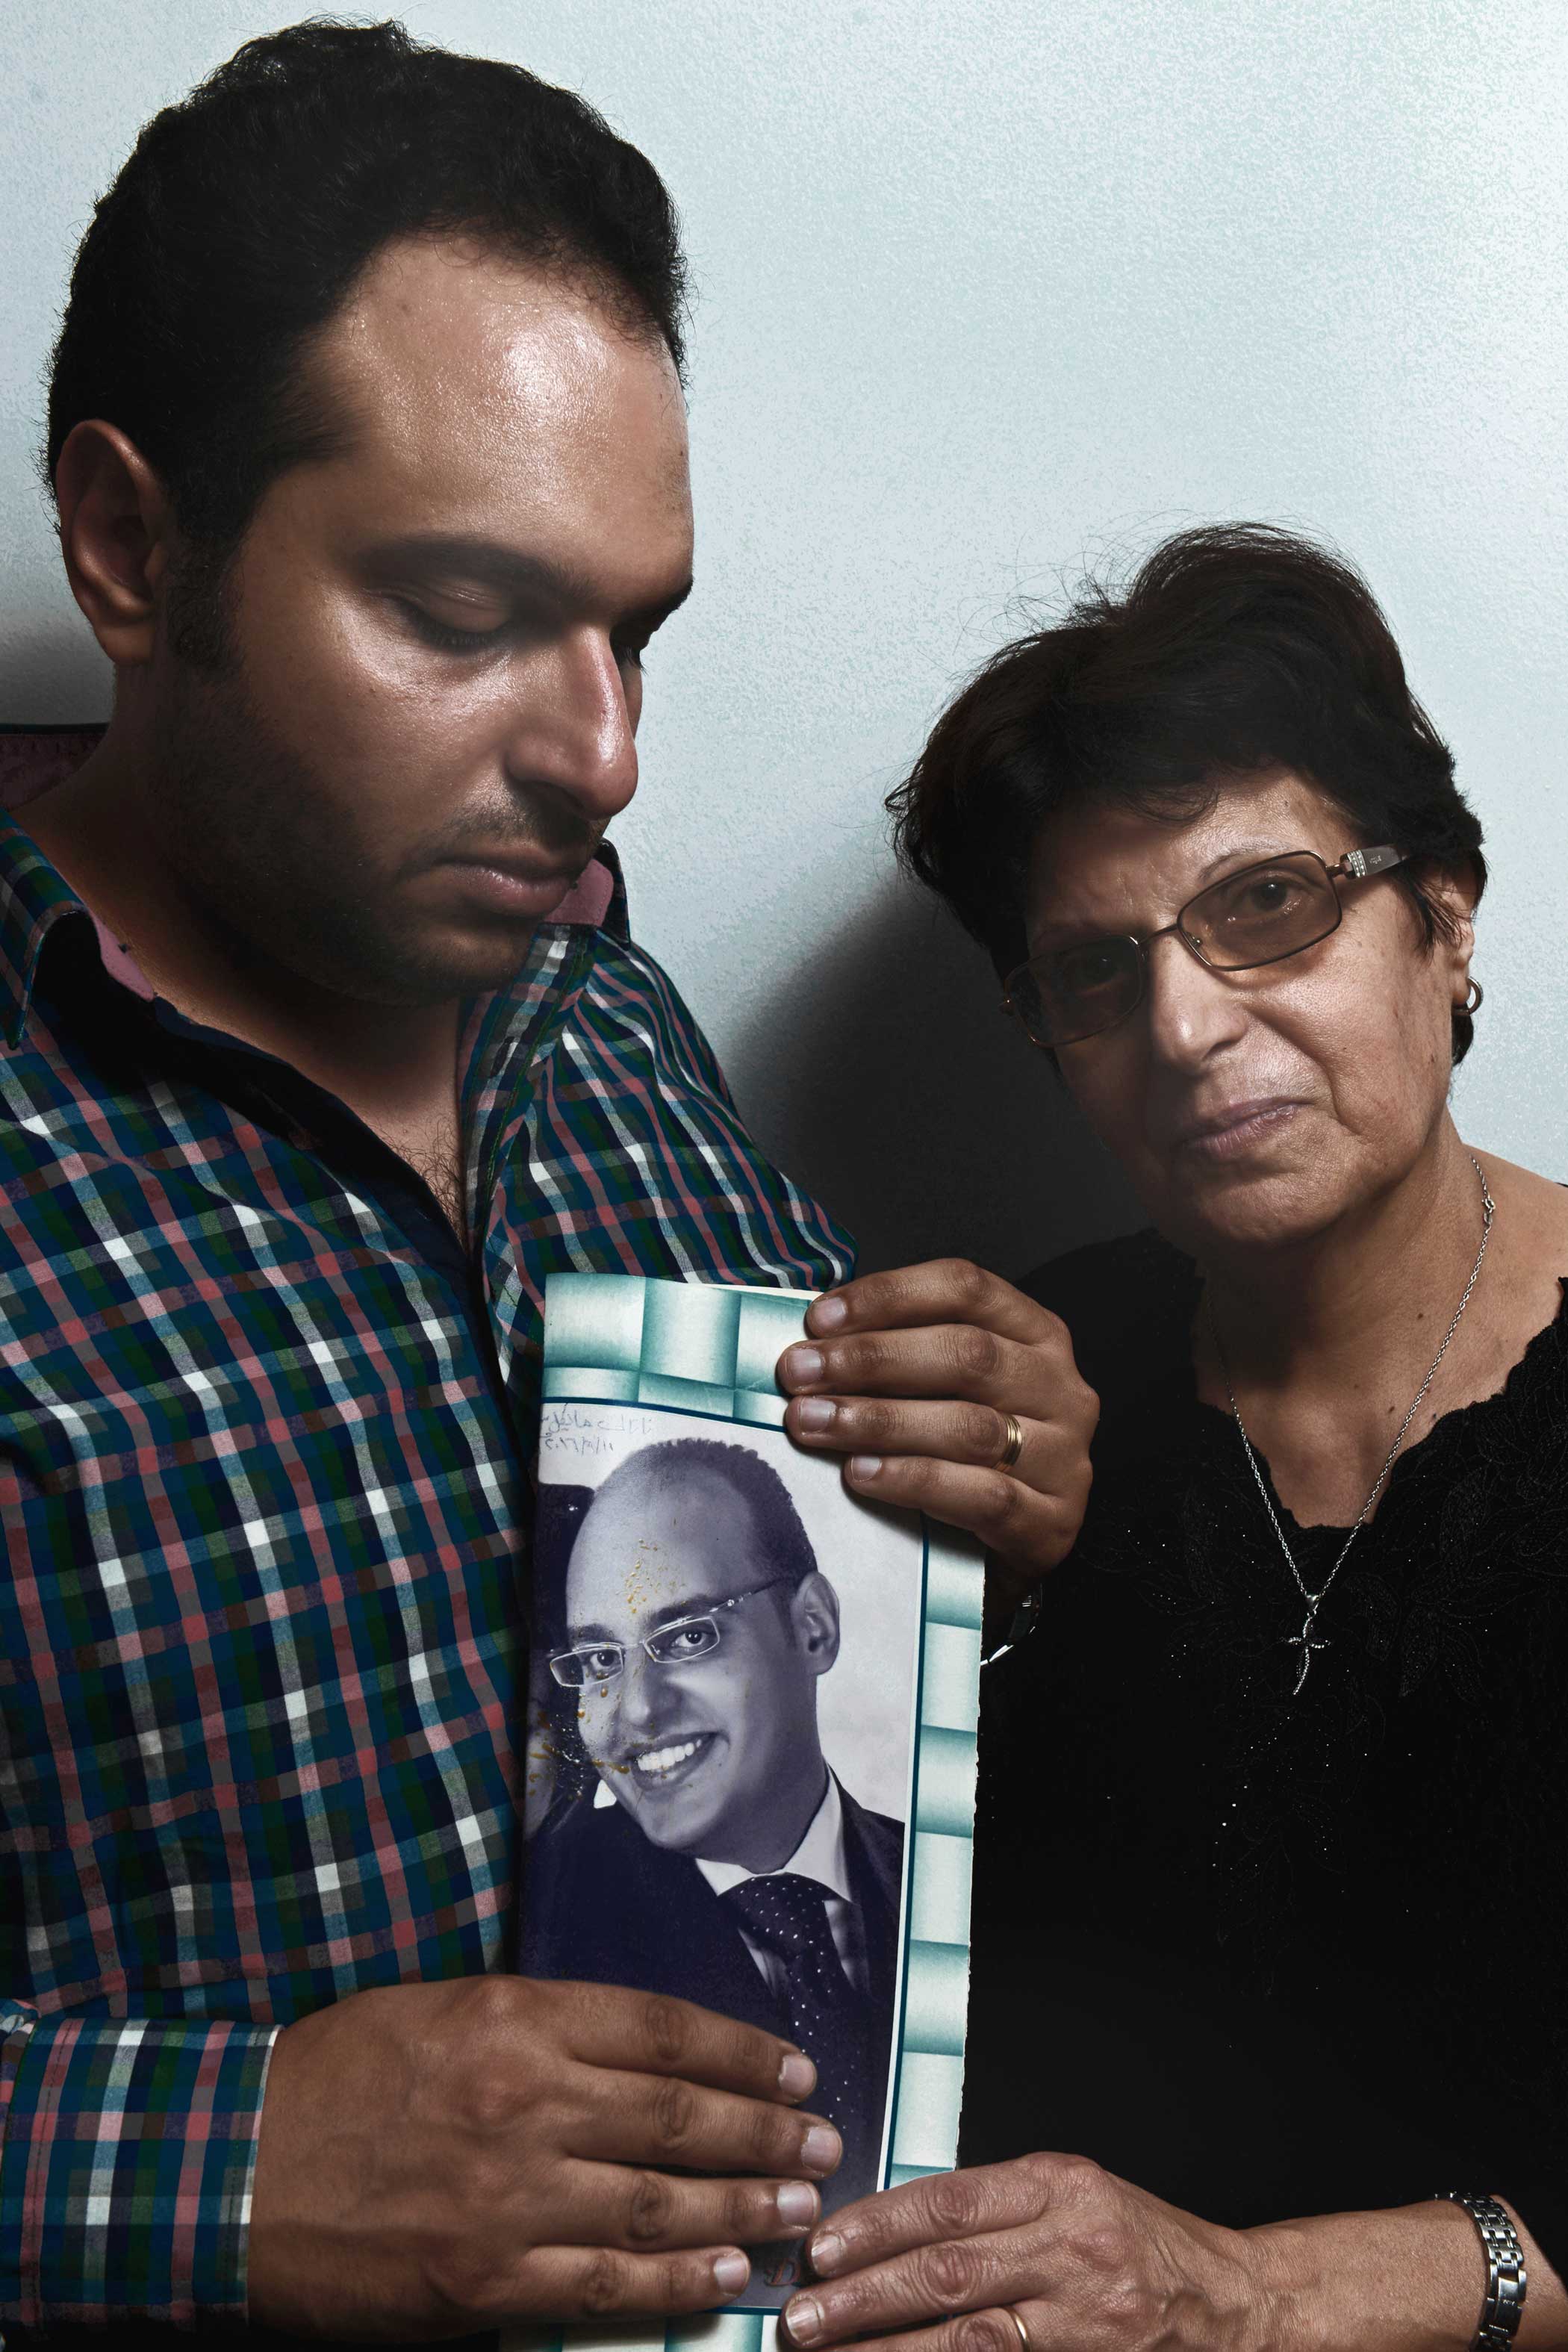 Mark Samir Iskander, 30, and Salwa Nemr Youssef, 60, hold a photo of Michael Samir Iskander, 36. Michael was Mark's brother and Salwa's son. "I rushed into the church when I heard the news. We could not find his body [in] the church. After looking for hours in hospitals, we found his body in the morgue," Mark said. "Michael was the father of the house the moment his father passed away," Salwa added. "He was my everything."